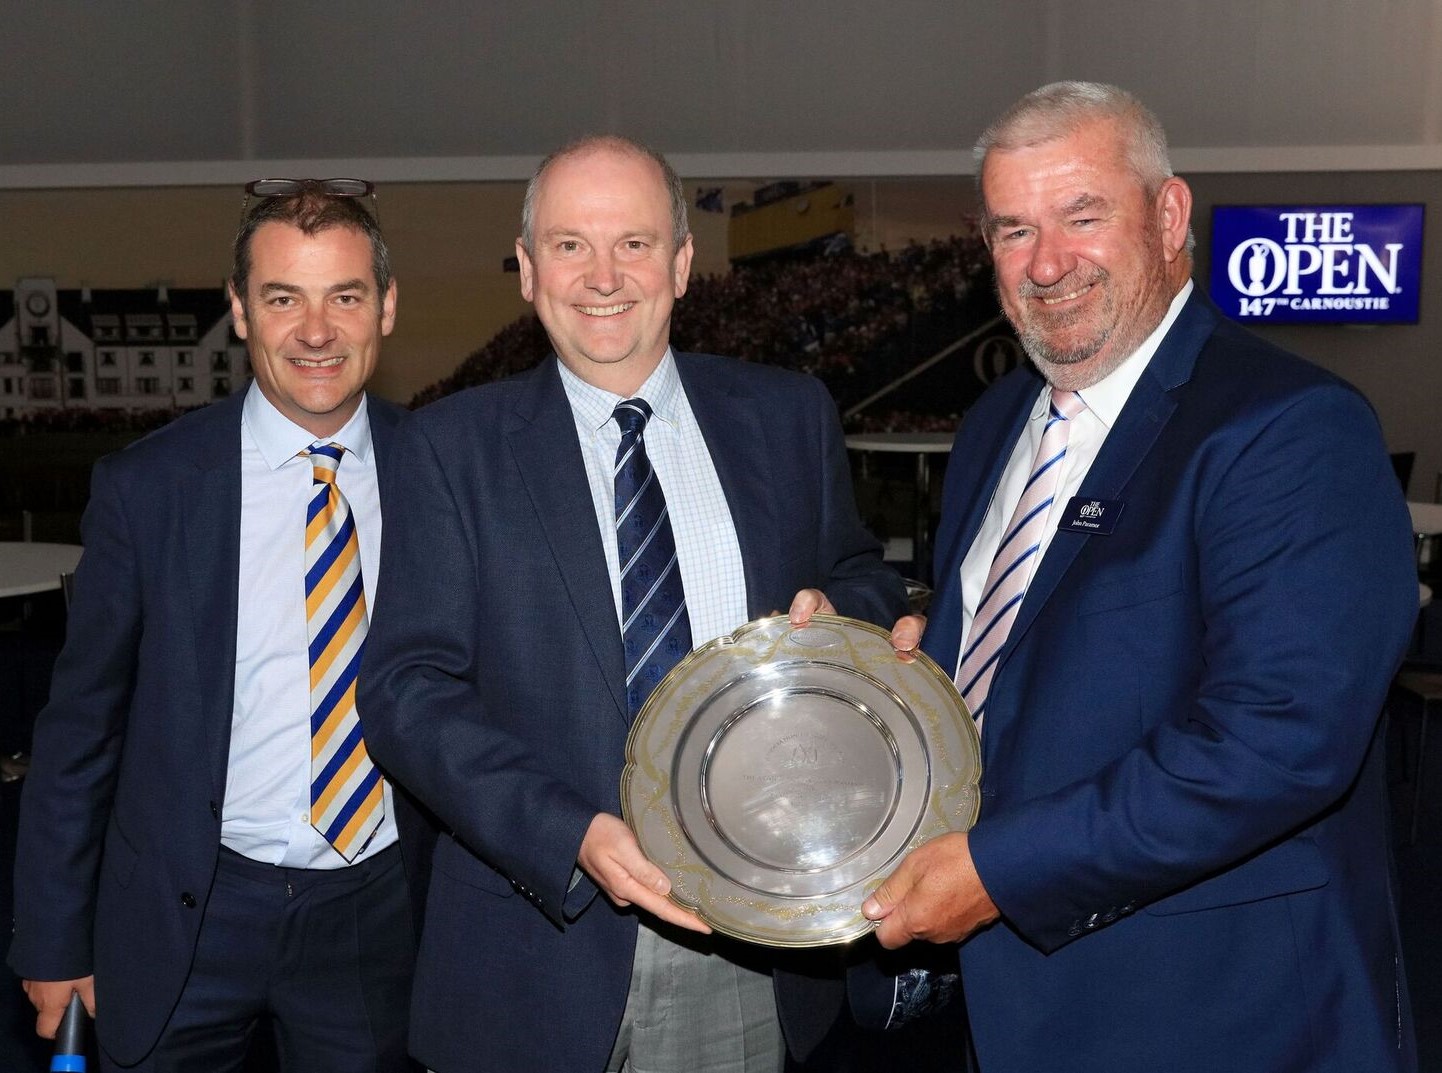 AGW Chairman Iain Carter with Roddy Williams, and the son of the AGWs much-respected Michael Williams who hands the award to the European Tour's Chief Referee, John Paramor.